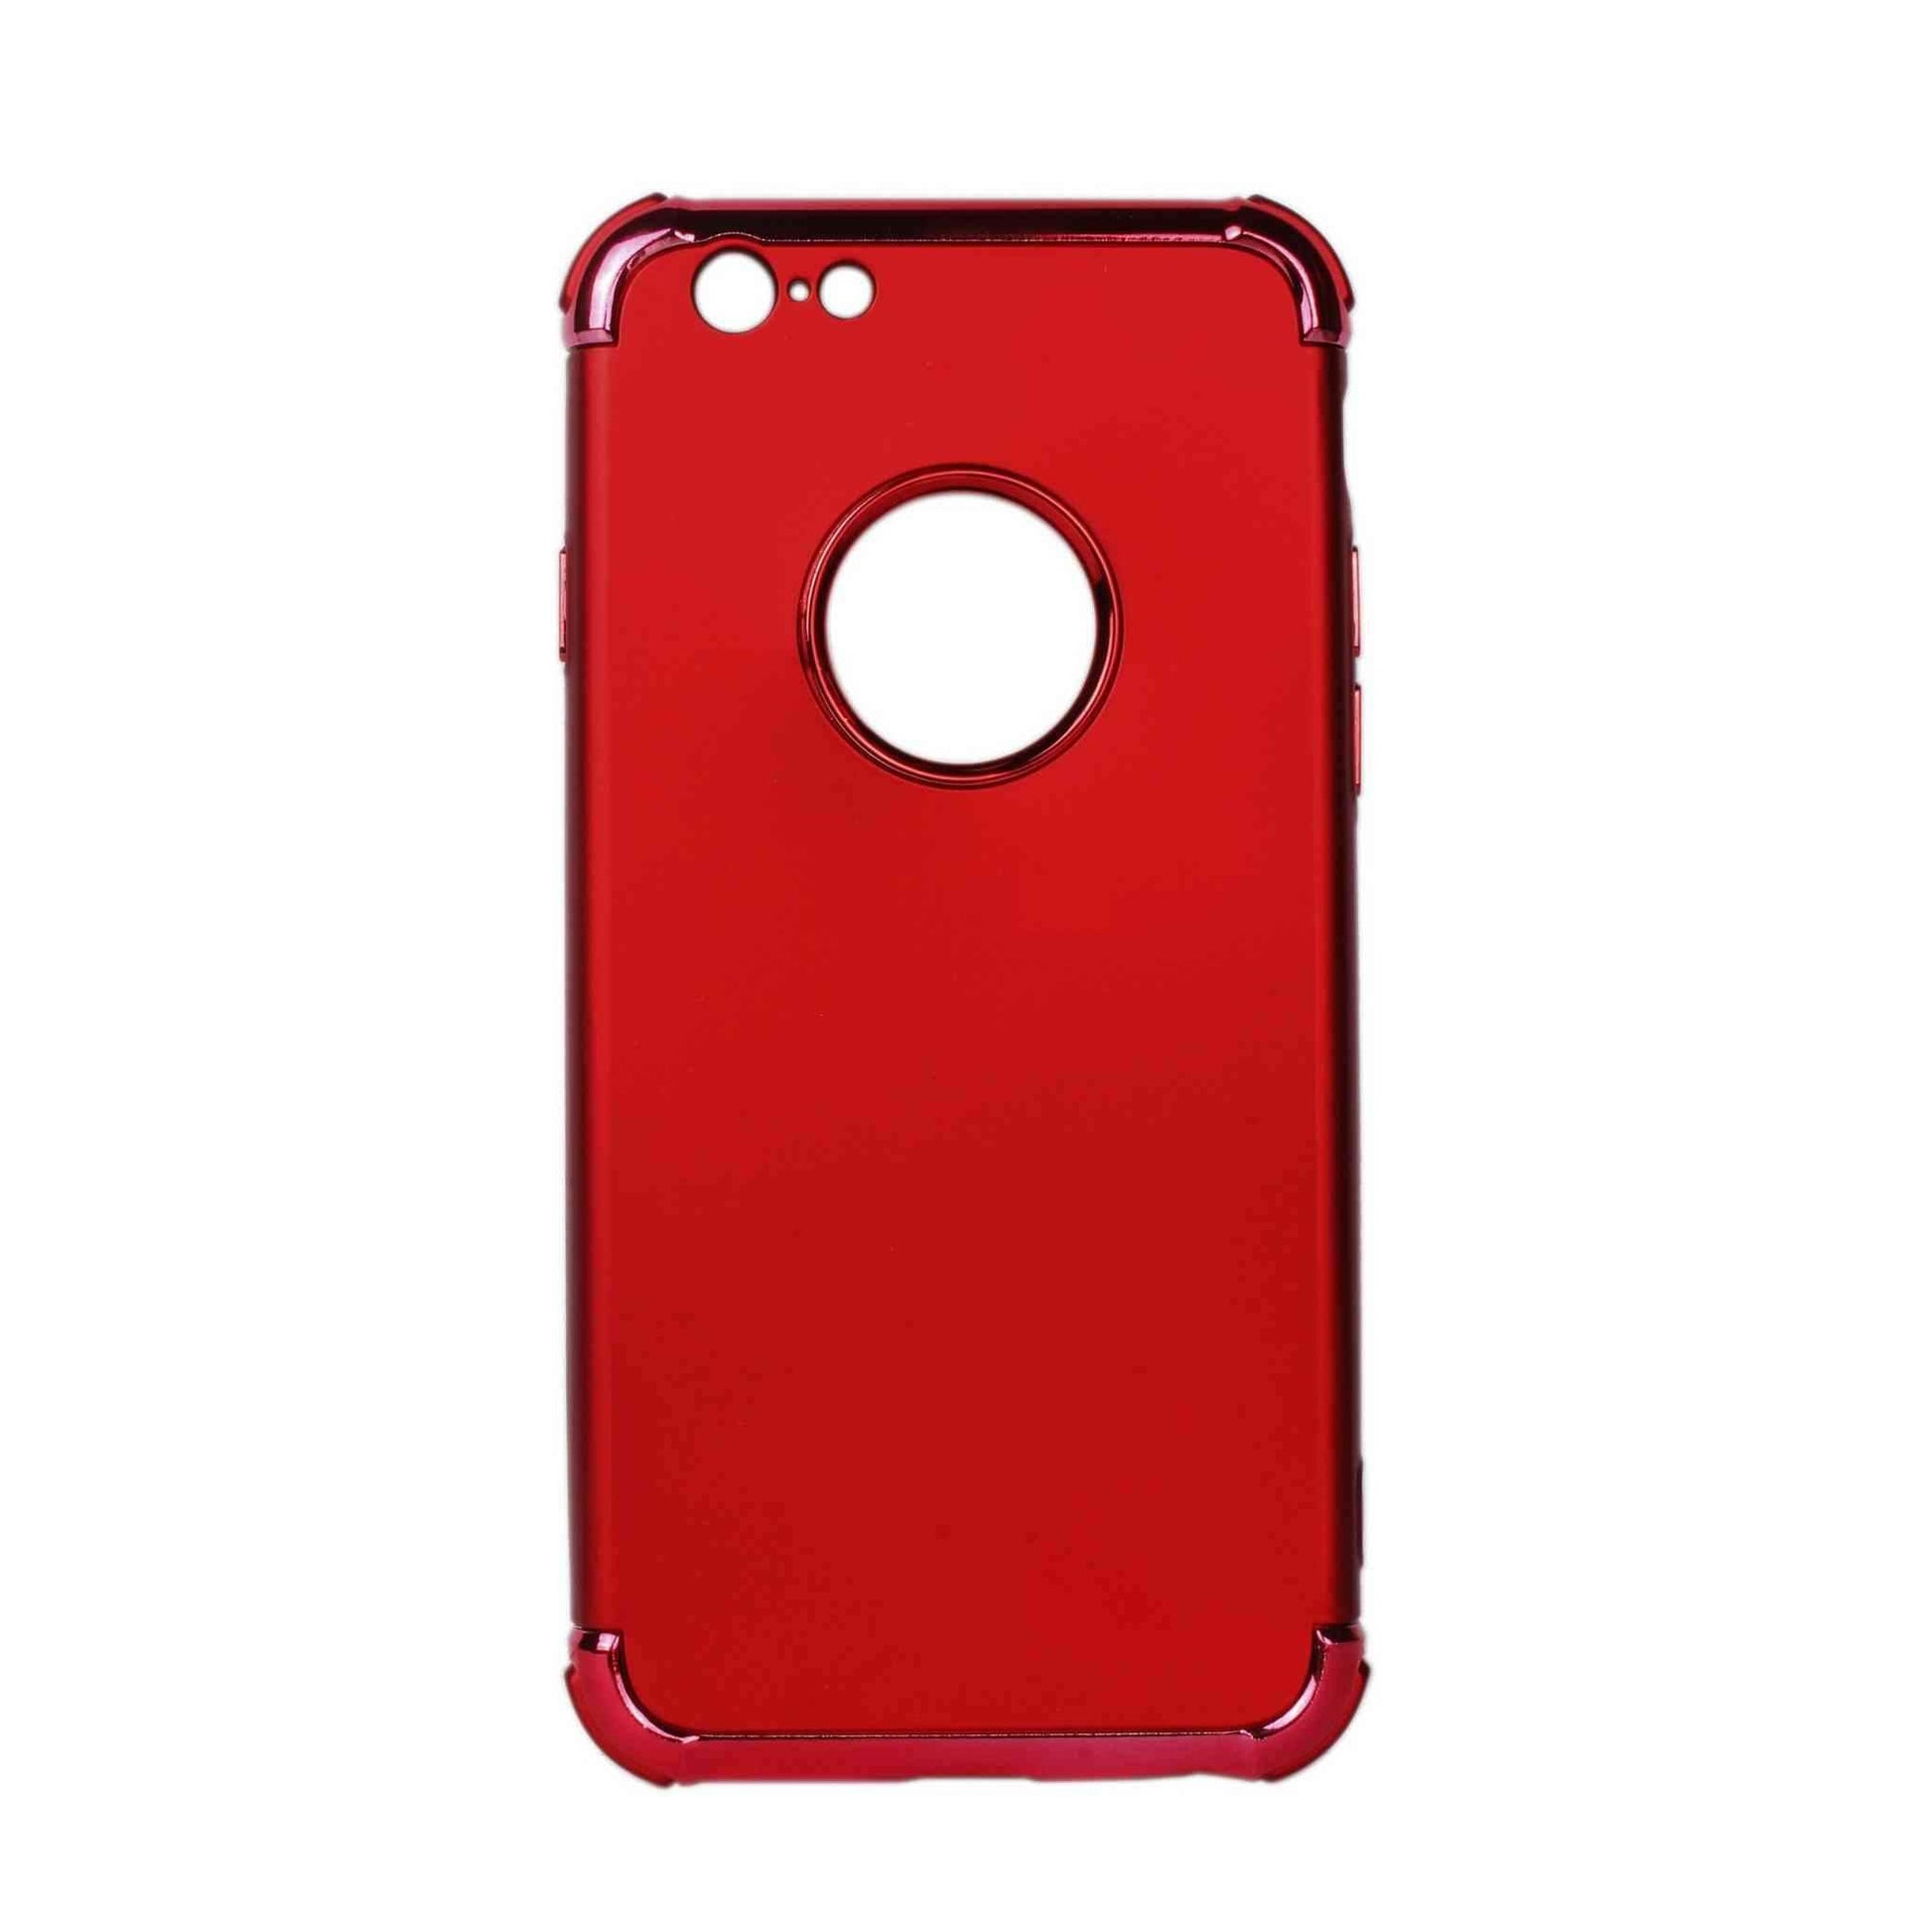 Indian Petals Polycarbonate Electro-plated Shock-proof Anti-scratch Protective Mobile Back Case Cover for Apple iPhone 6, Red - Indian Petals